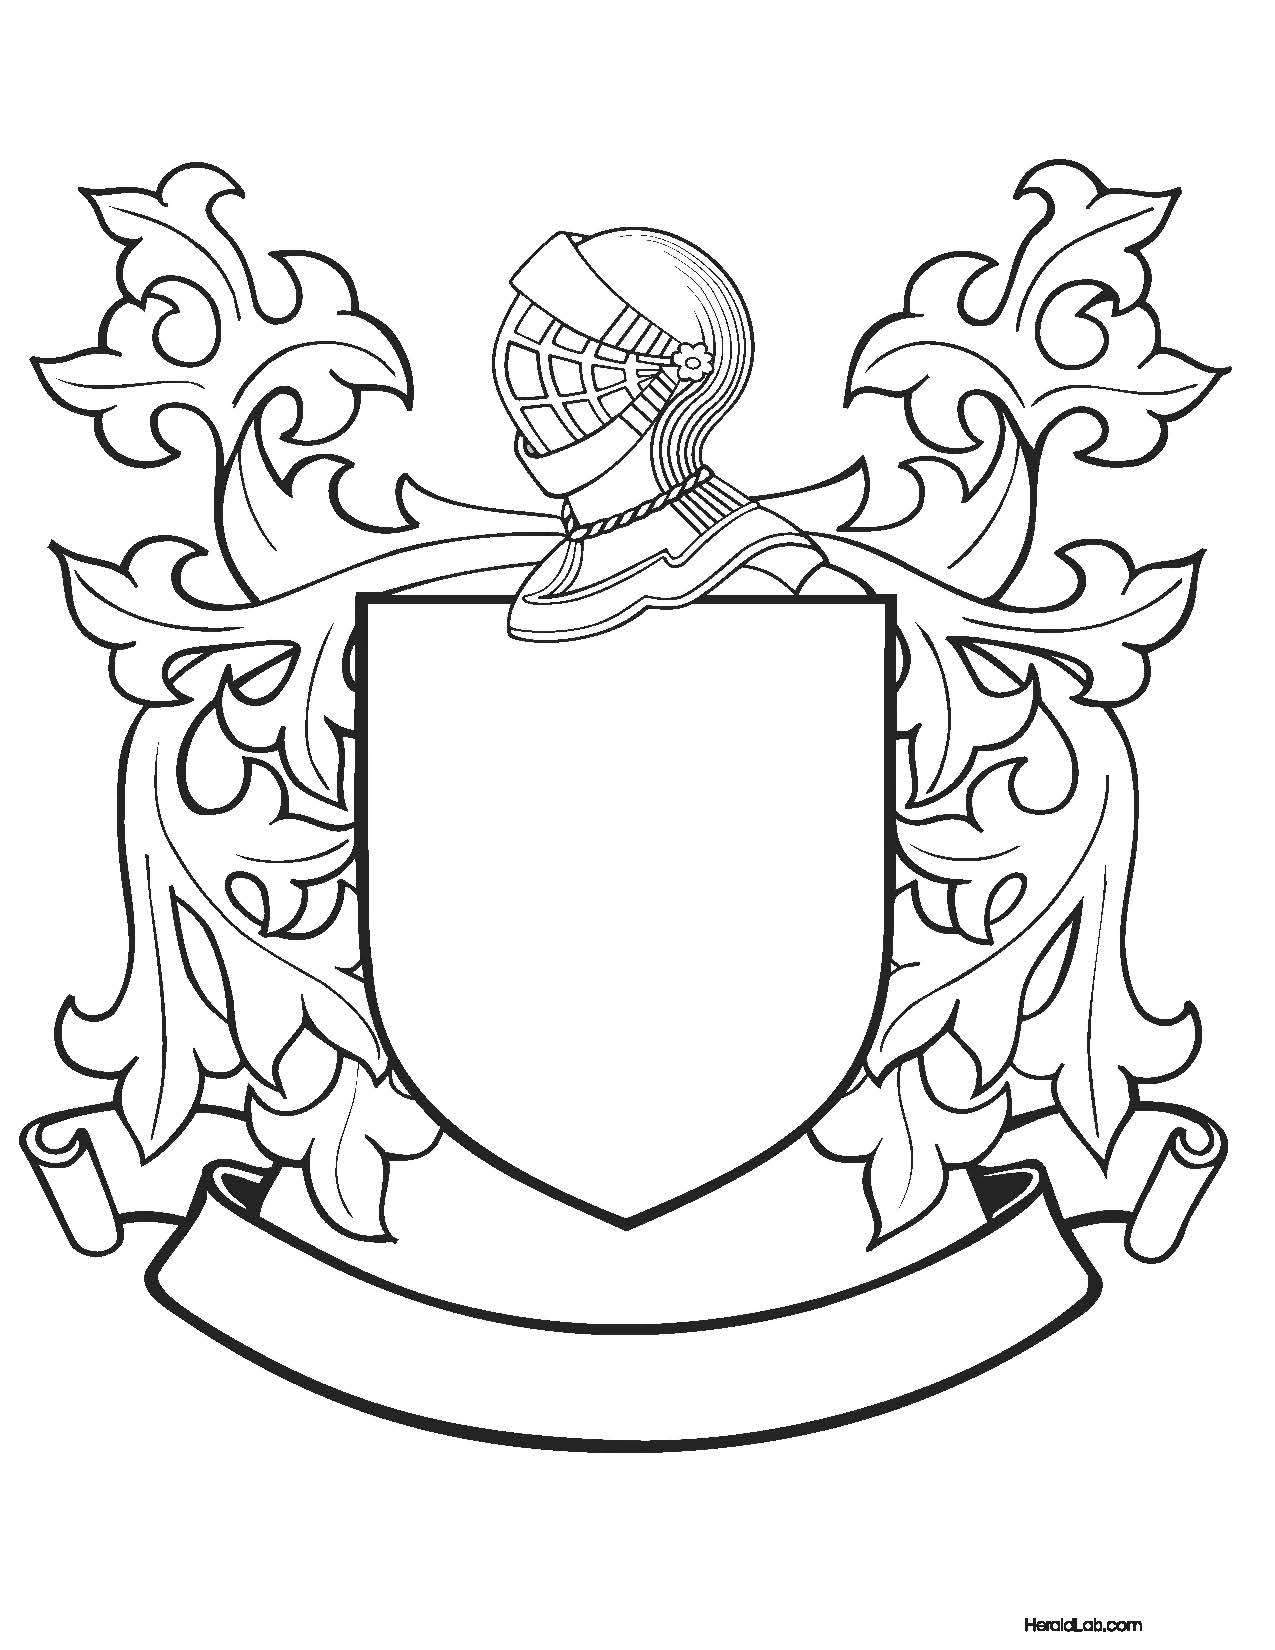 build-your-own-coat-of-arms-file-pdf-instant-download-herald-lab